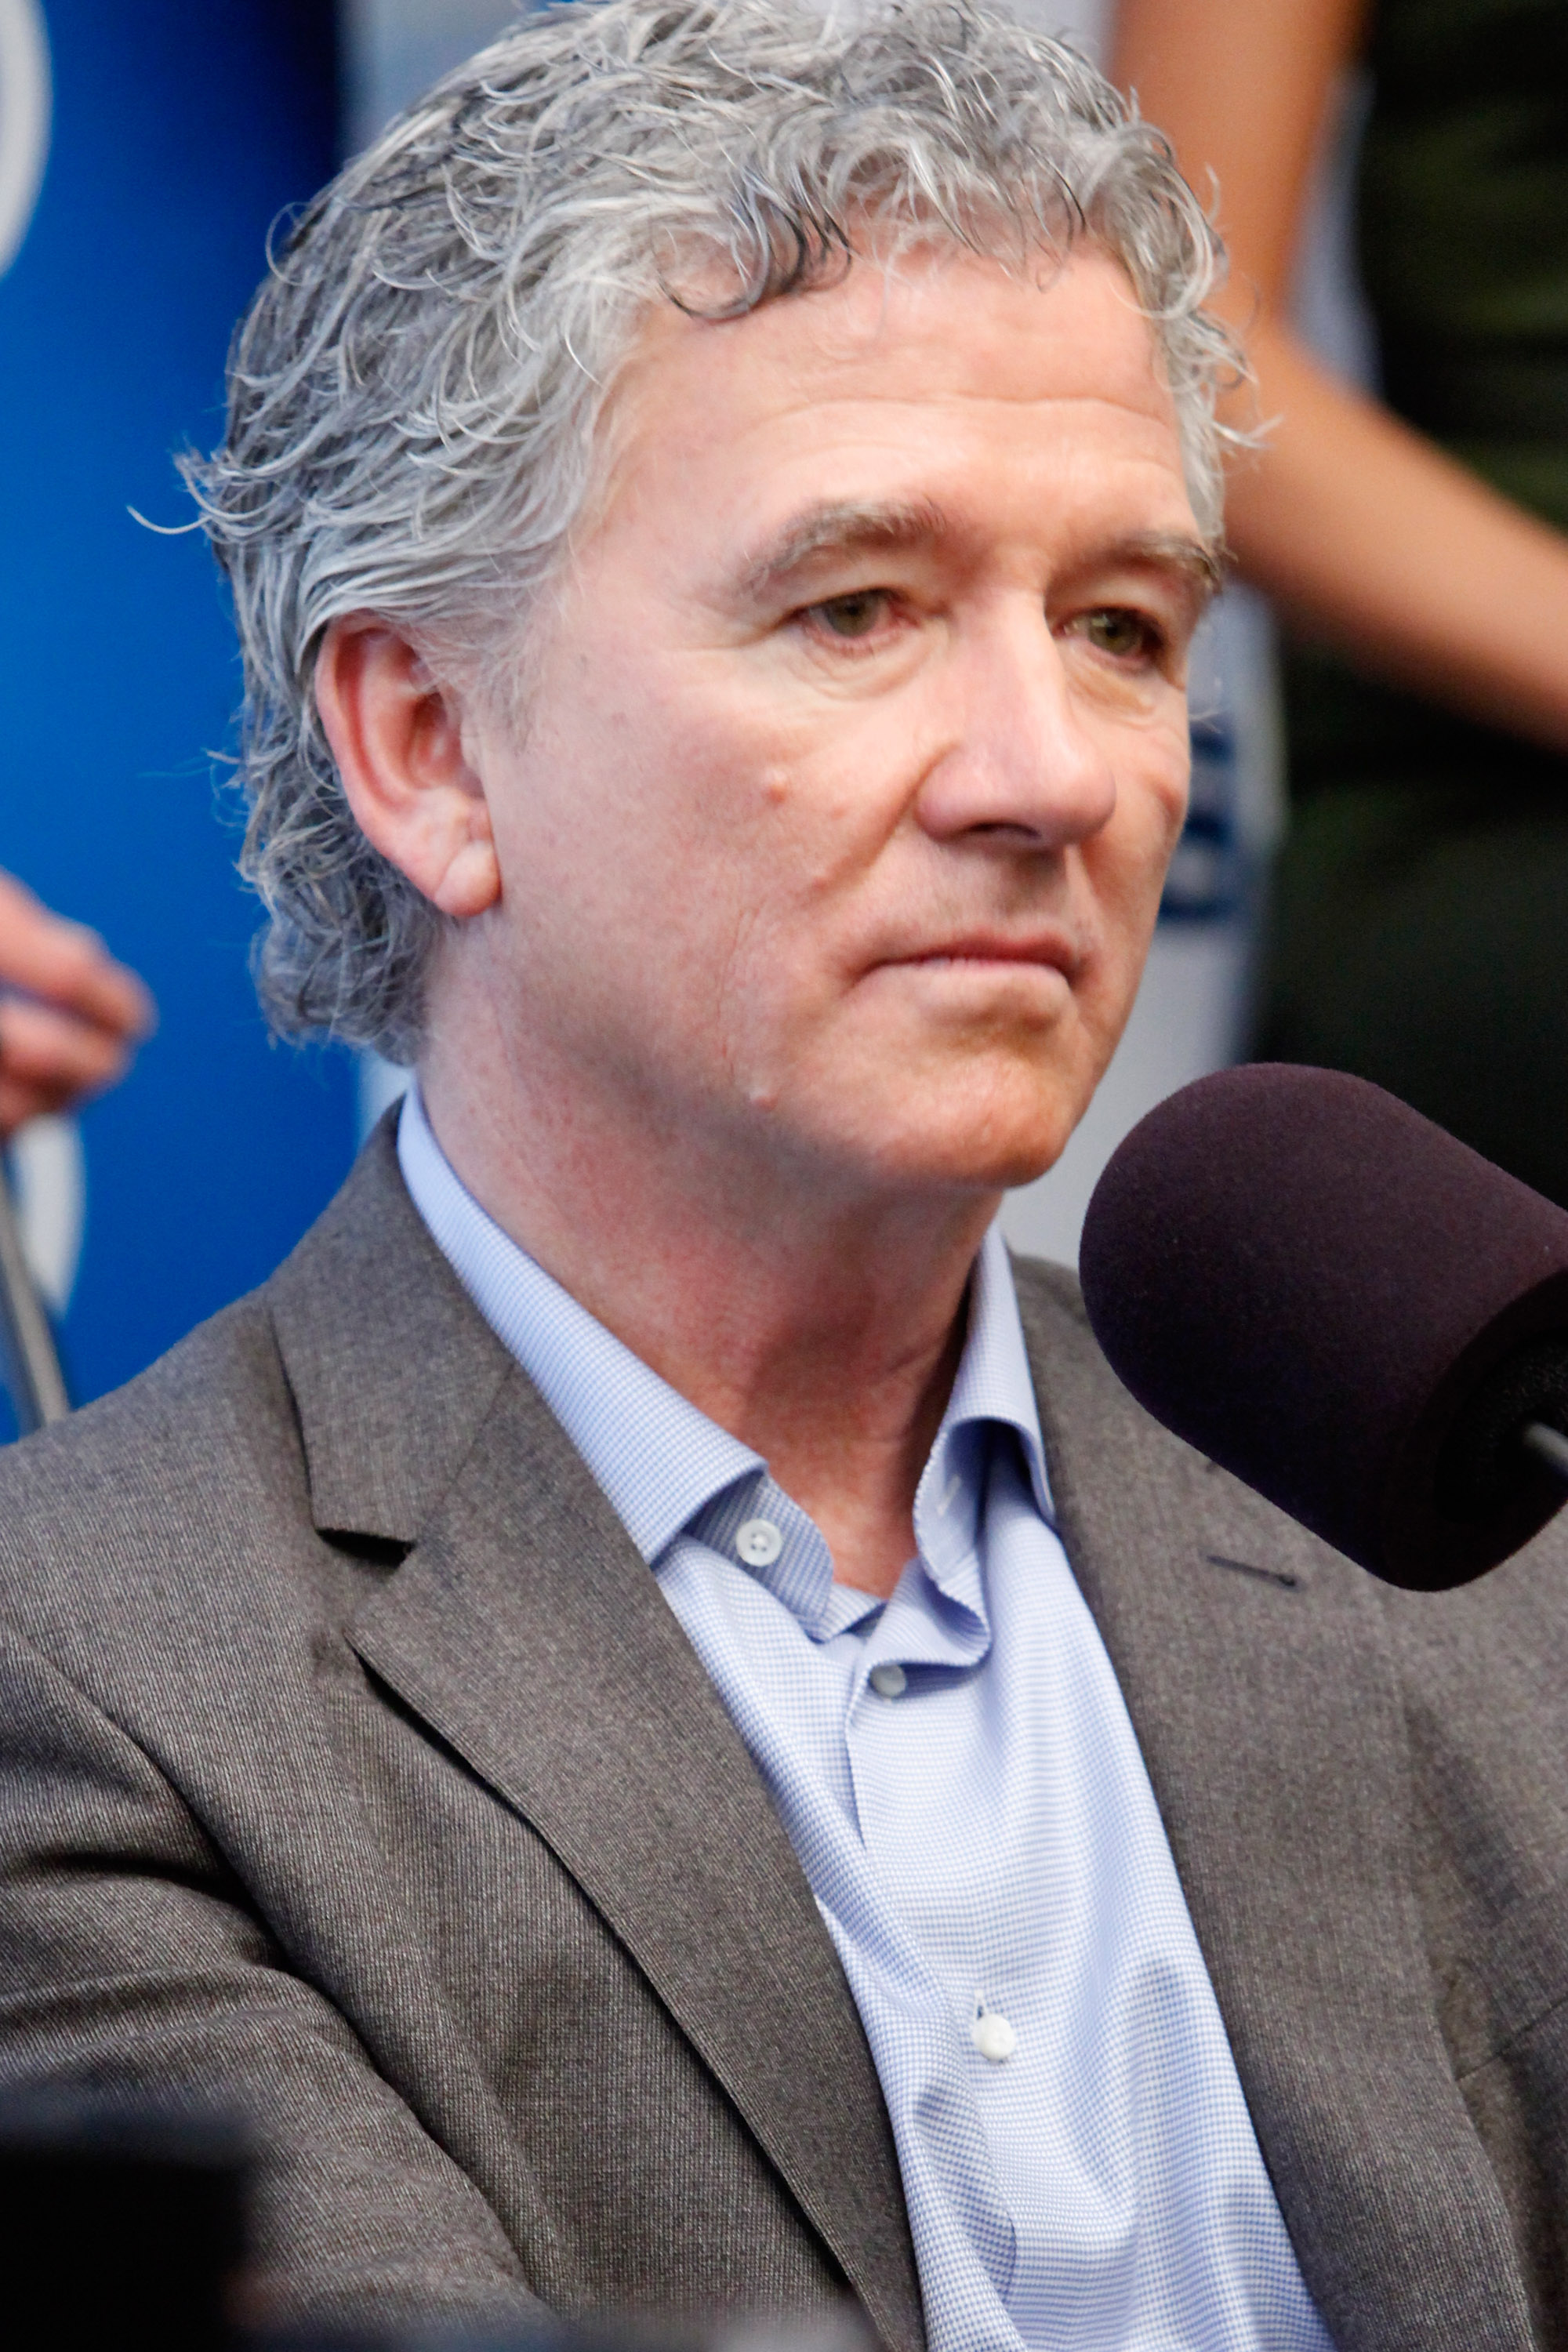 Patrick Duffy in an interview on SiriusXM's "Morning Jolt with Larry Flick" at the SiriusXM Studio on June 11, 2012, in New York City | Source: Getty Images